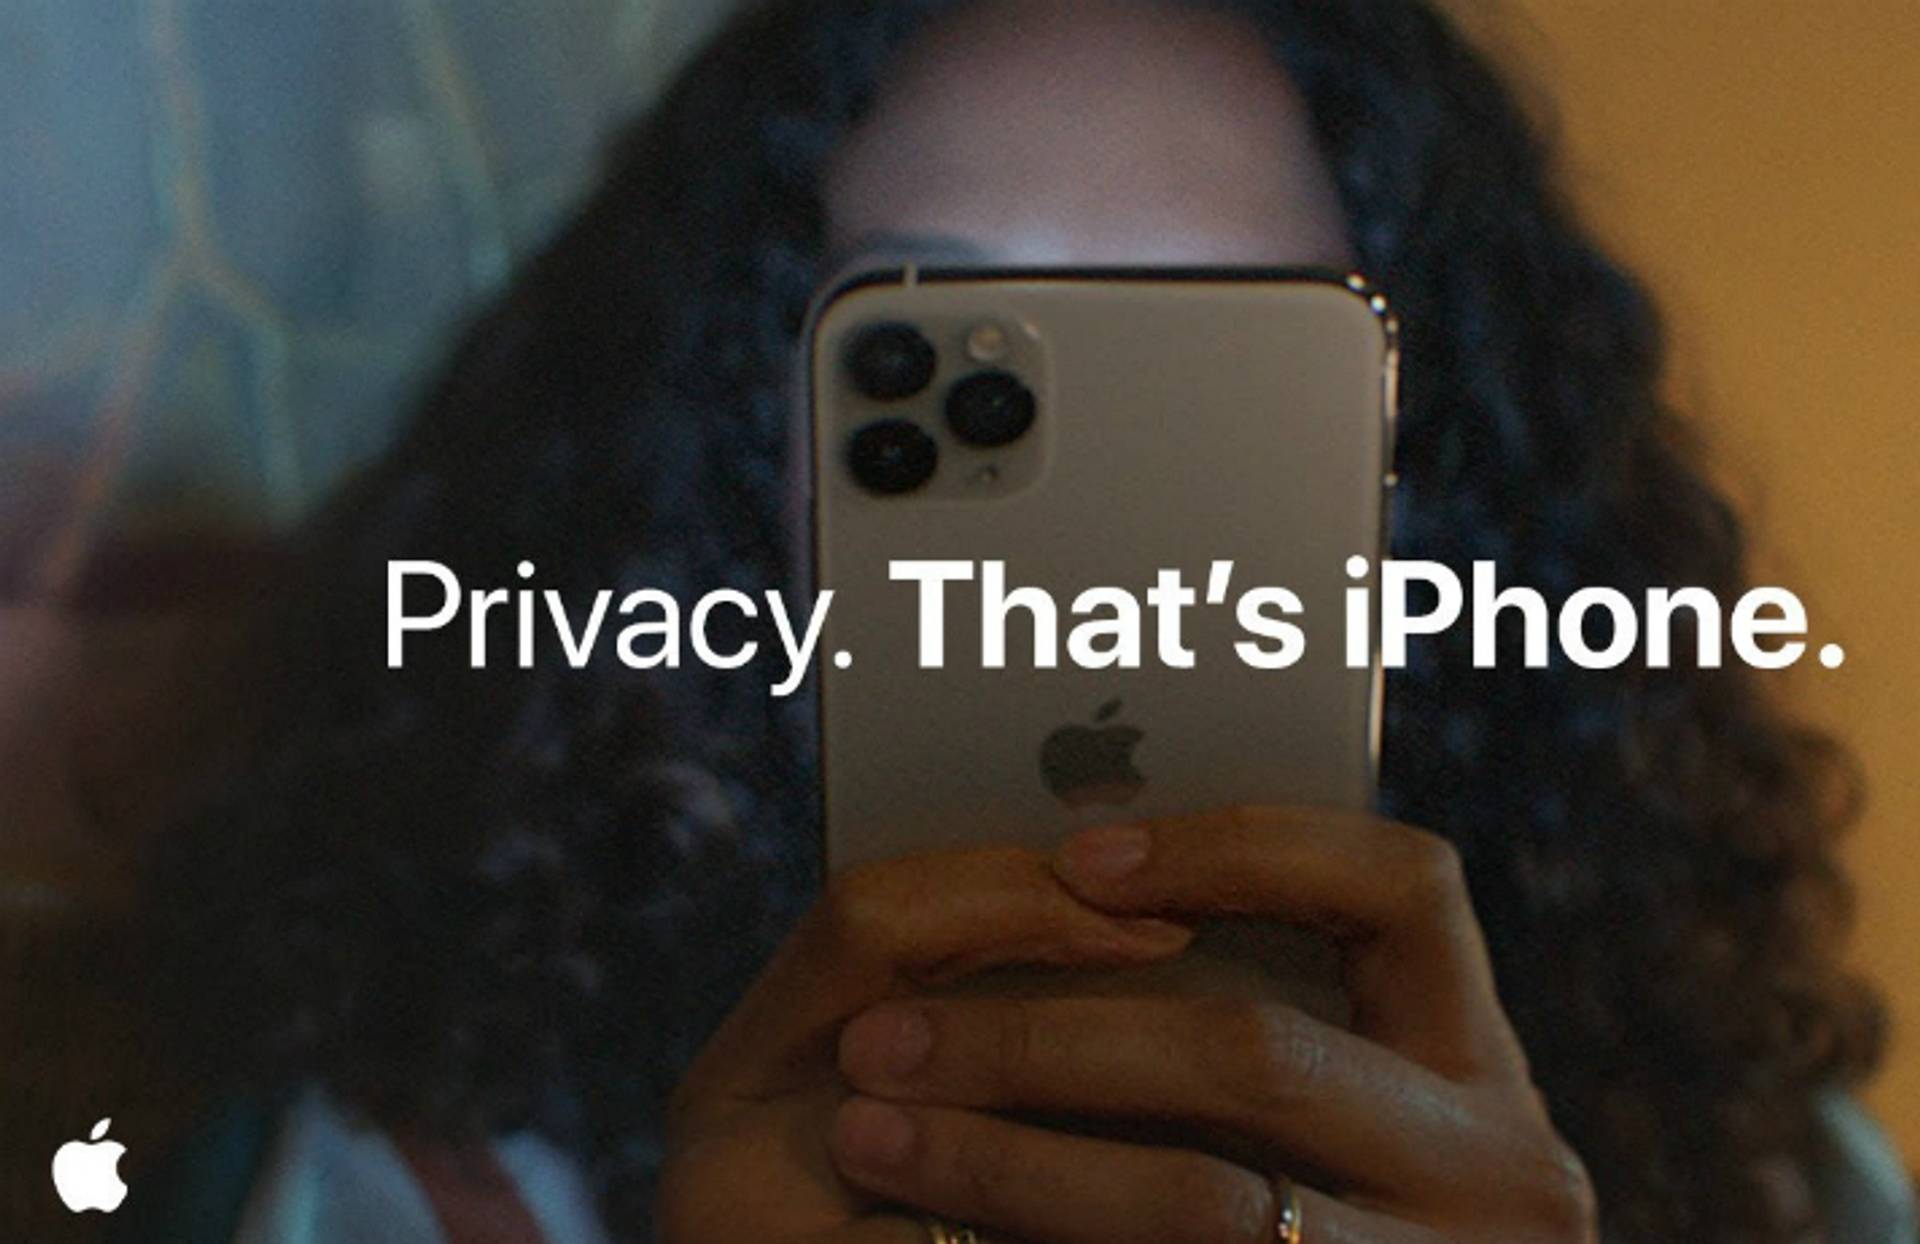 Apple ad aims to win over data privacy skeptics